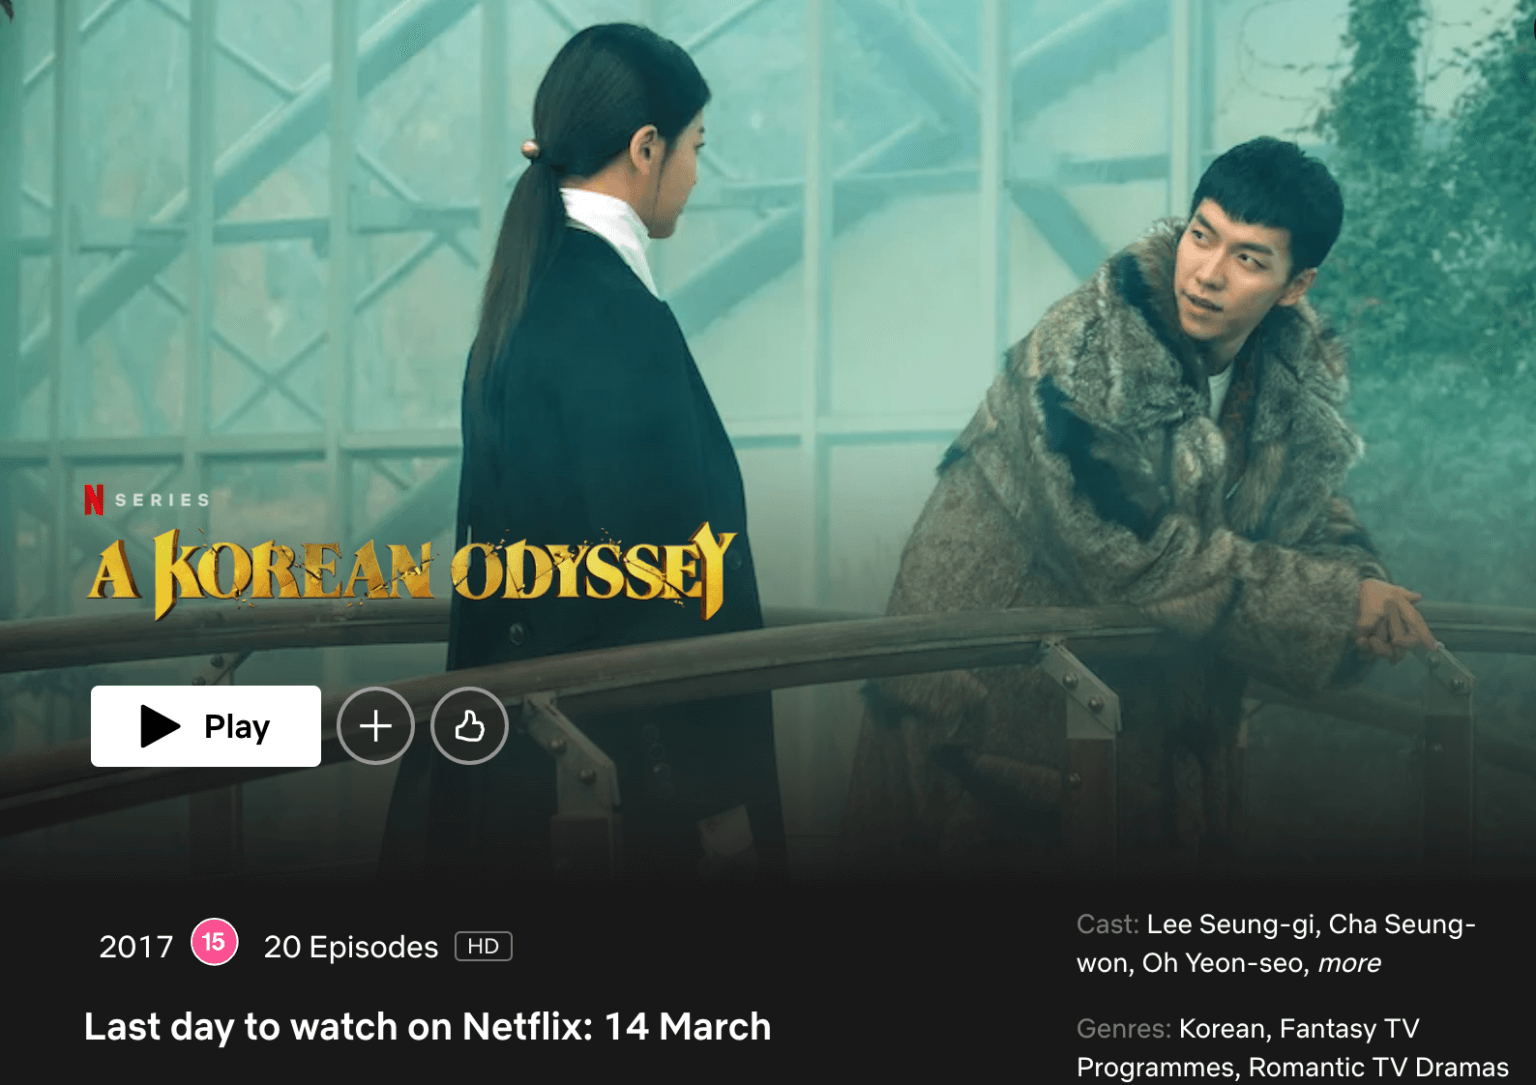 Netflix KDramas 'A Korean Odyssey' and 'Live' Leaving Netflix in March